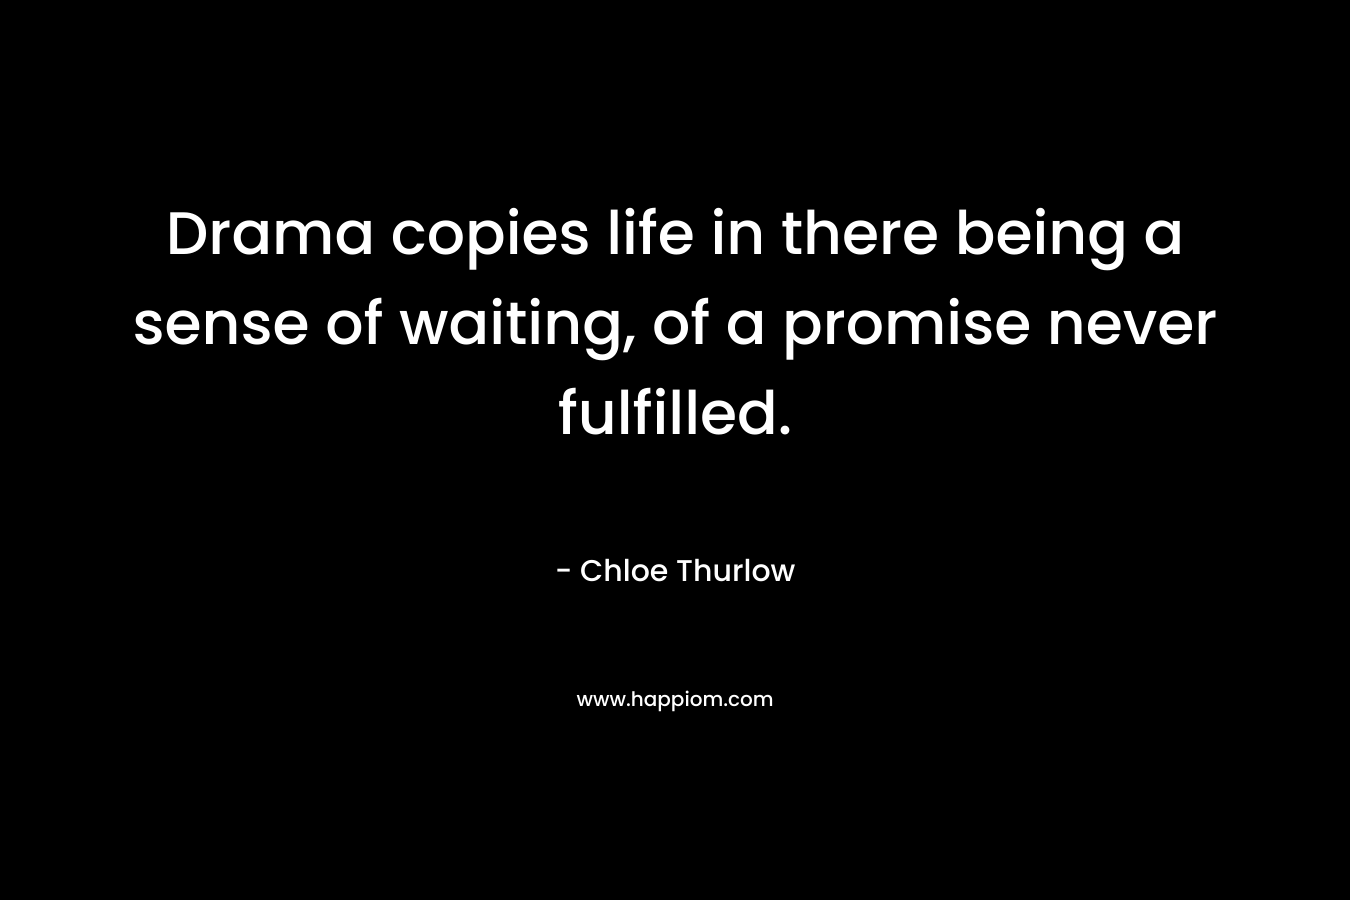 Drama copies life in there being a sense of waiting, of a promise never fulfilled. – Chloe Thurlow